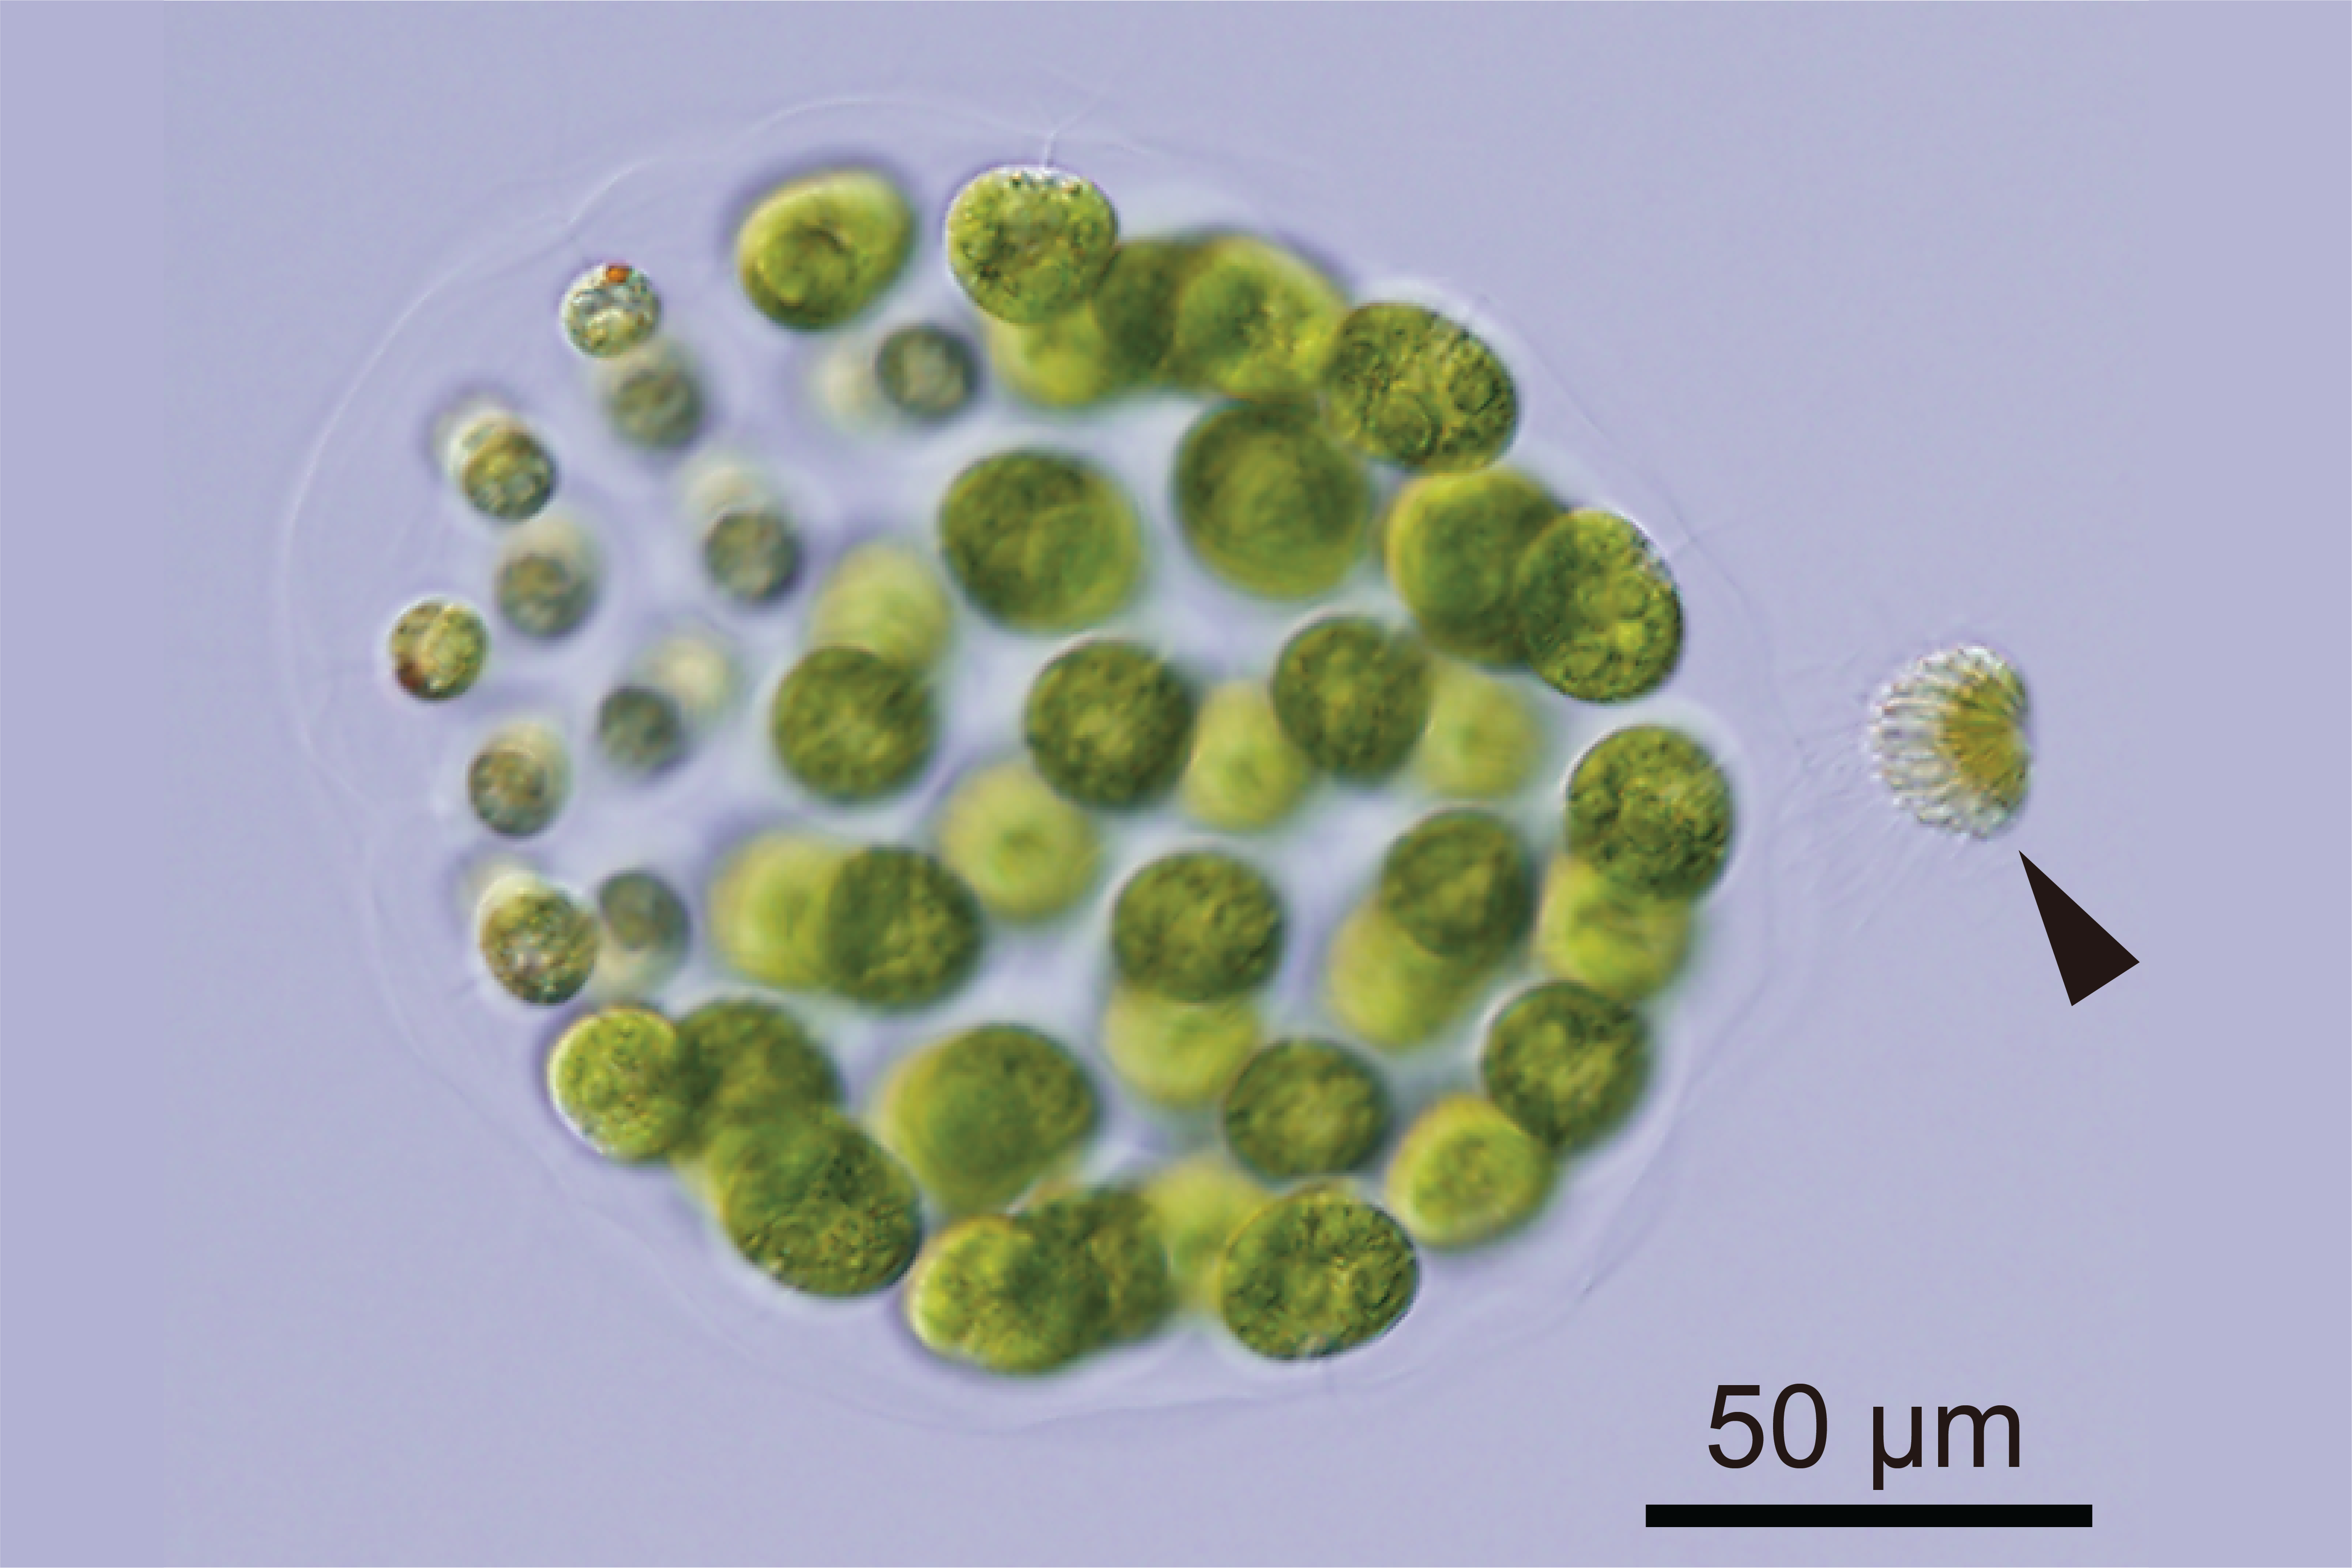 Light microscope image of green algae cells with a male sperm packet on the right side of the image.